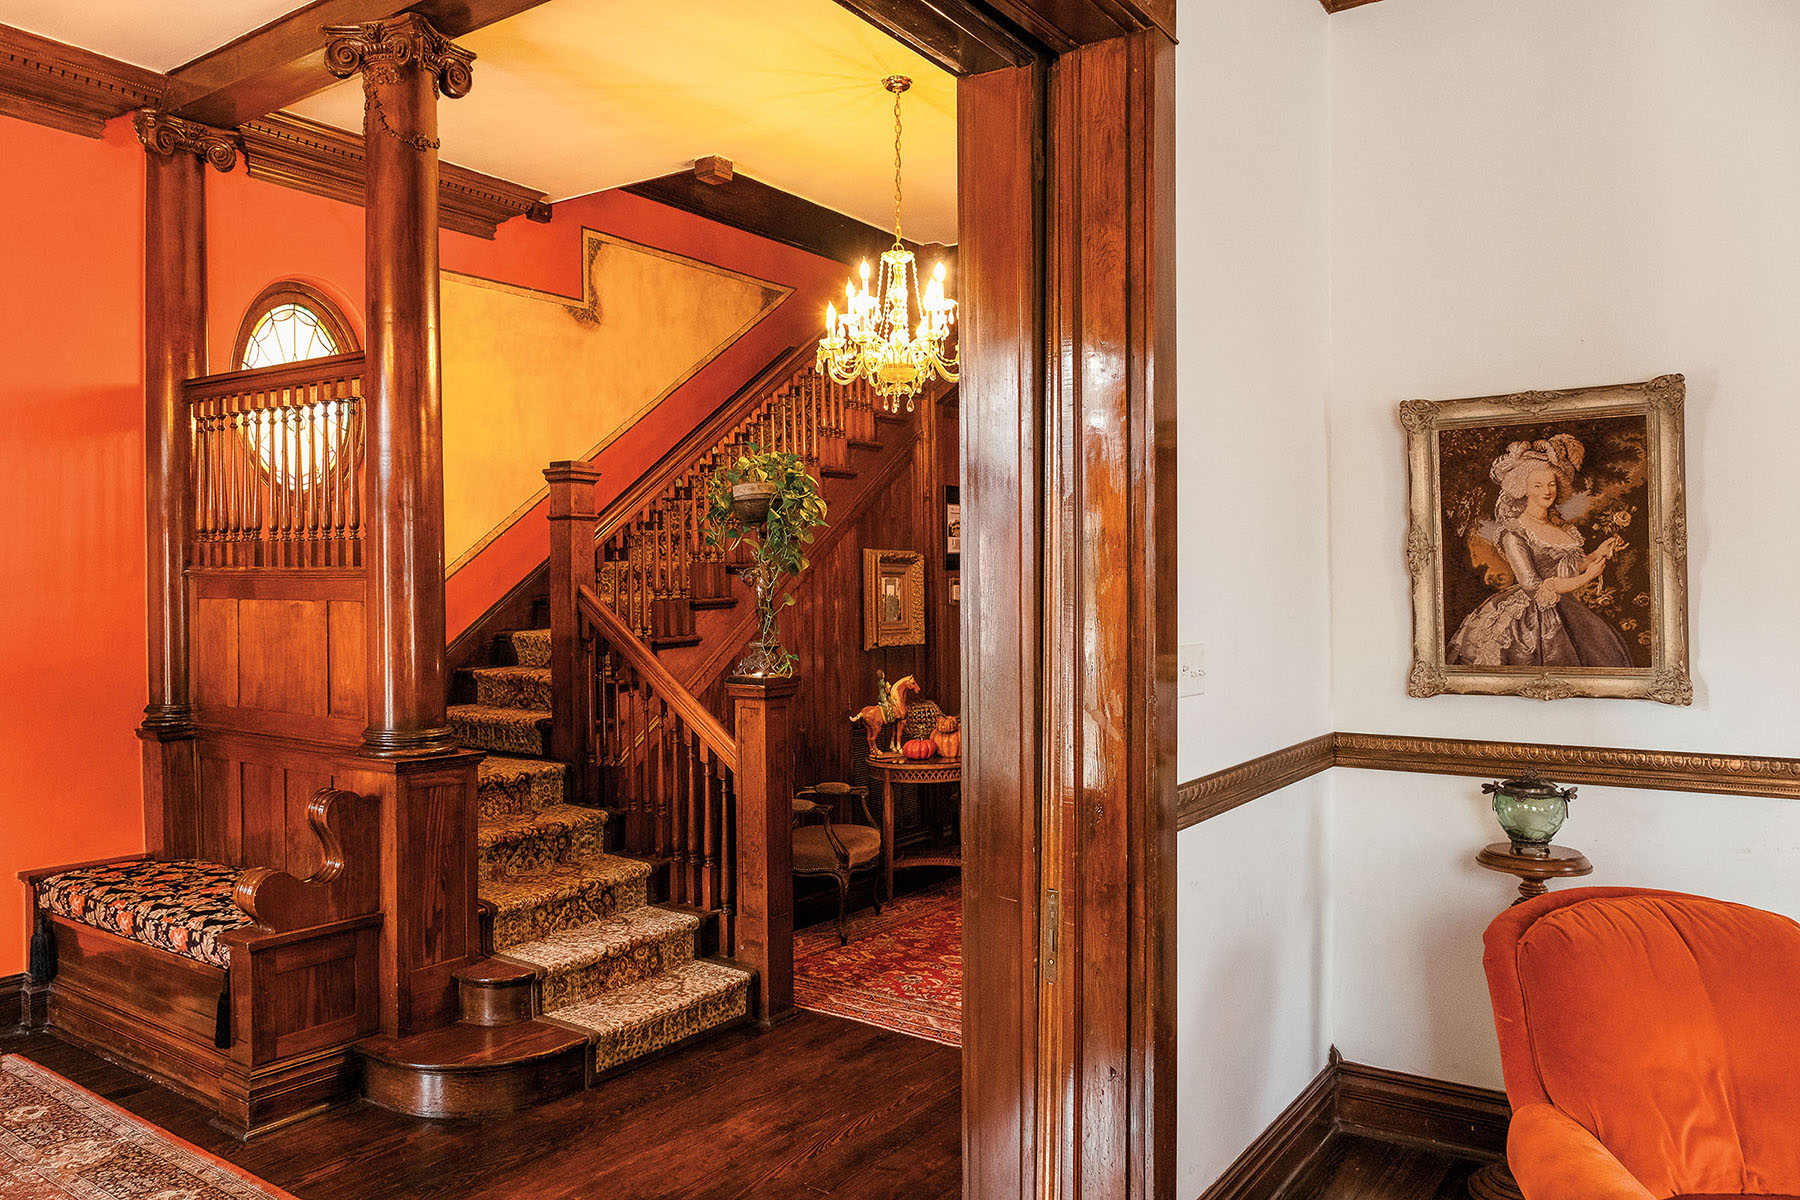 The interior of a mansion with rich wood paneling, warm lights, and framed pictures